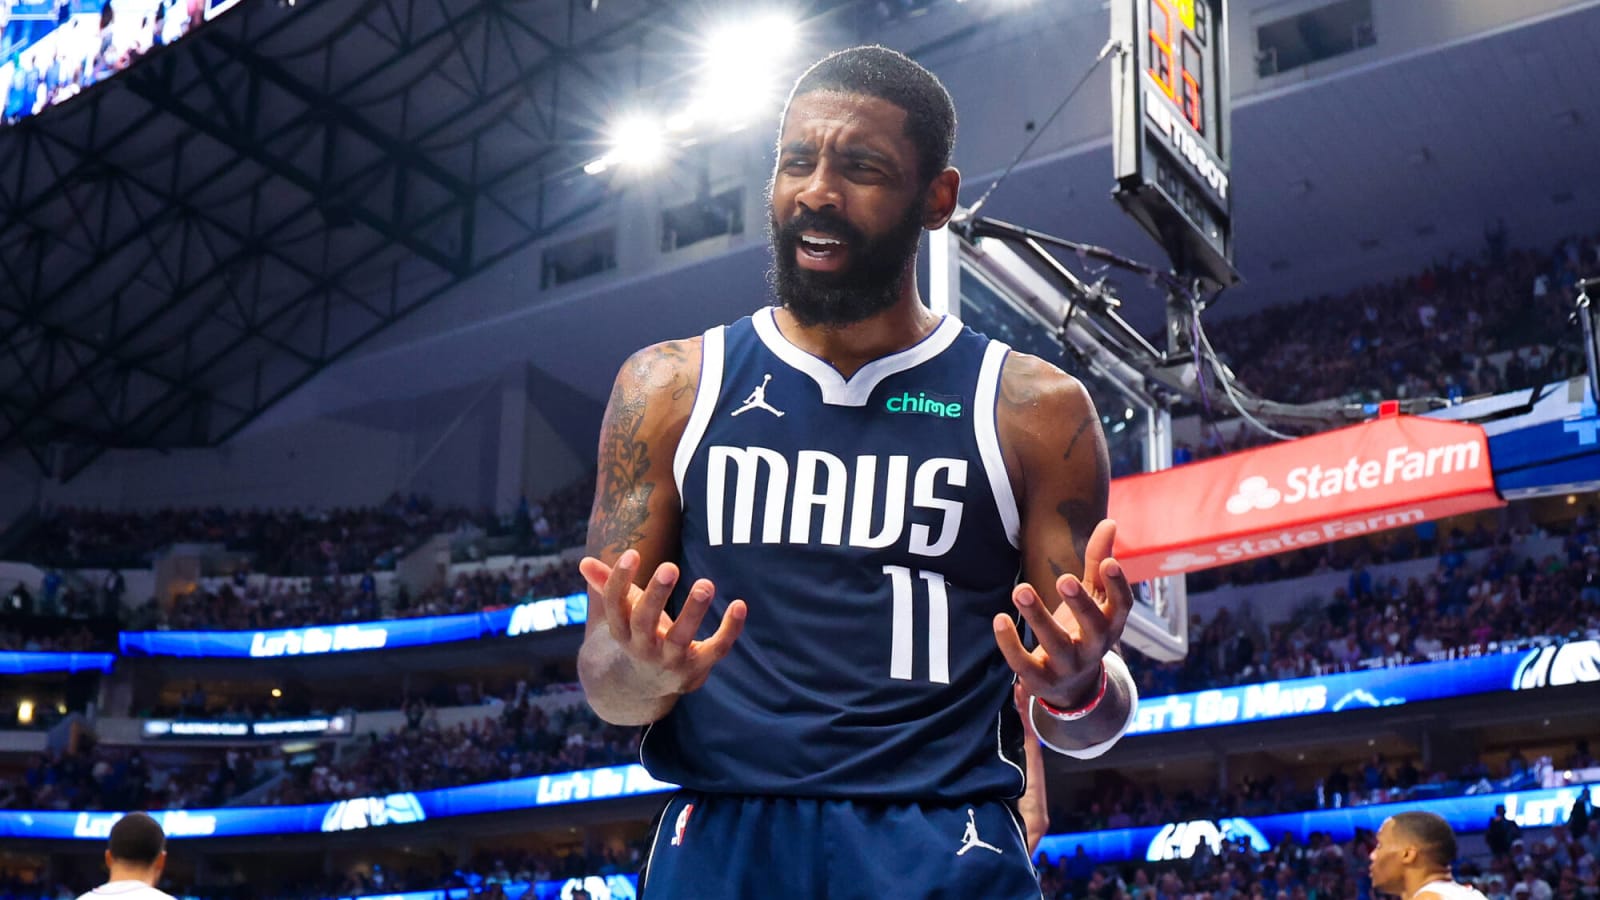 NBA GMs and Presidents stopped Kyrie Irving and LeBron James reunion, reveals Mavs star in surprising admission